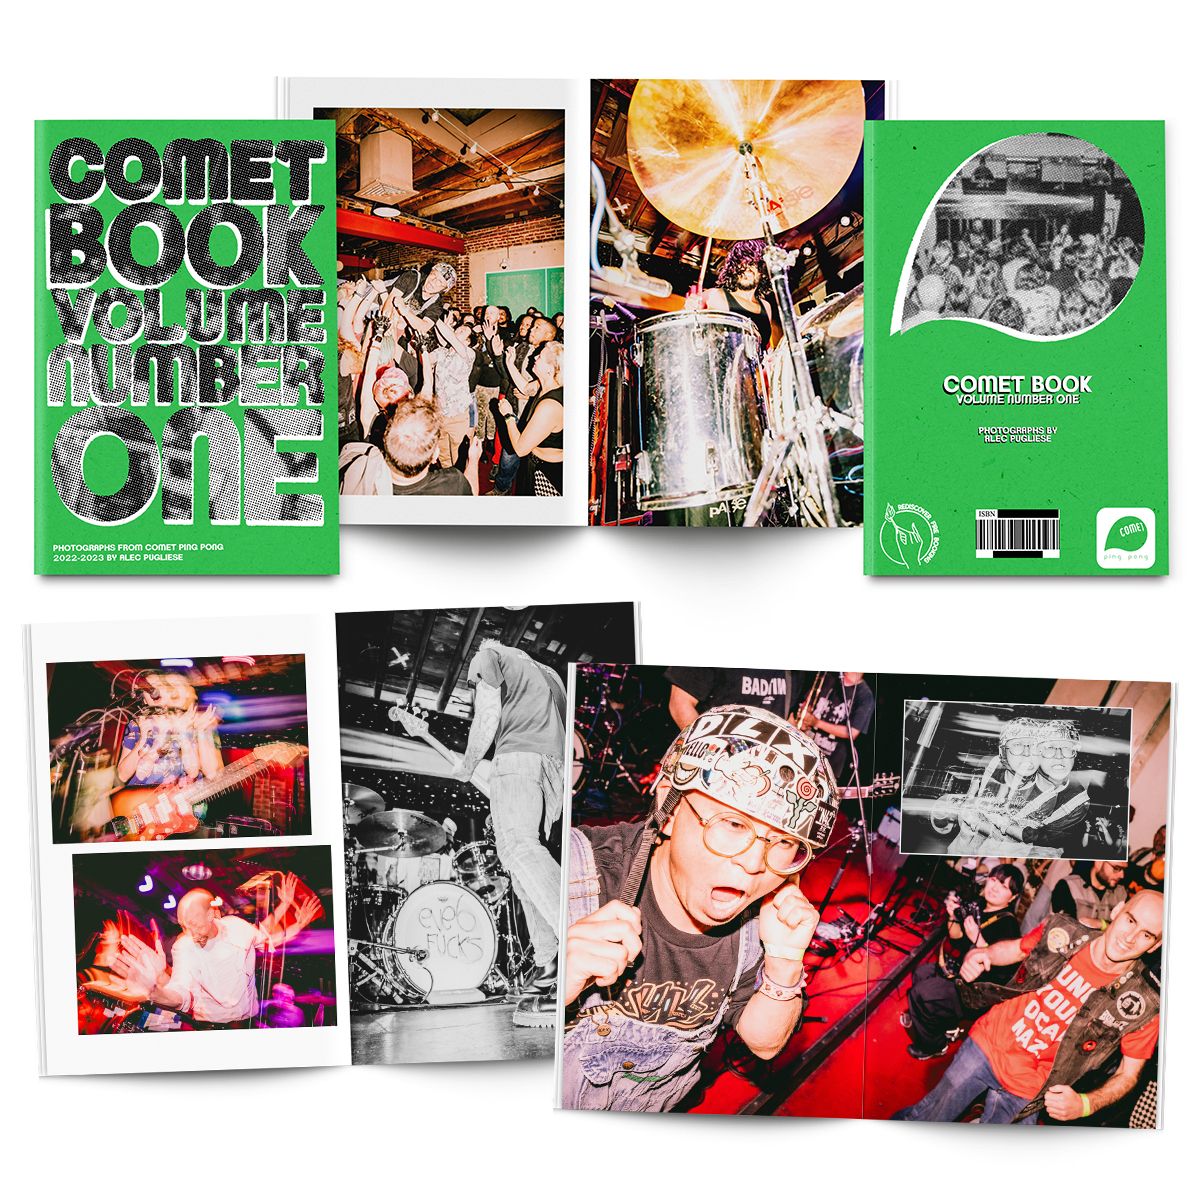 Introducing “Comet Book: Volume No.1”, a collection of photographs taken at Comet shows from 2022-2023 by @alecpugliese. This 6X9, softcover book includes over 50 pages of color, and black and white photos. On sale now: buff.ly/49NCHl3